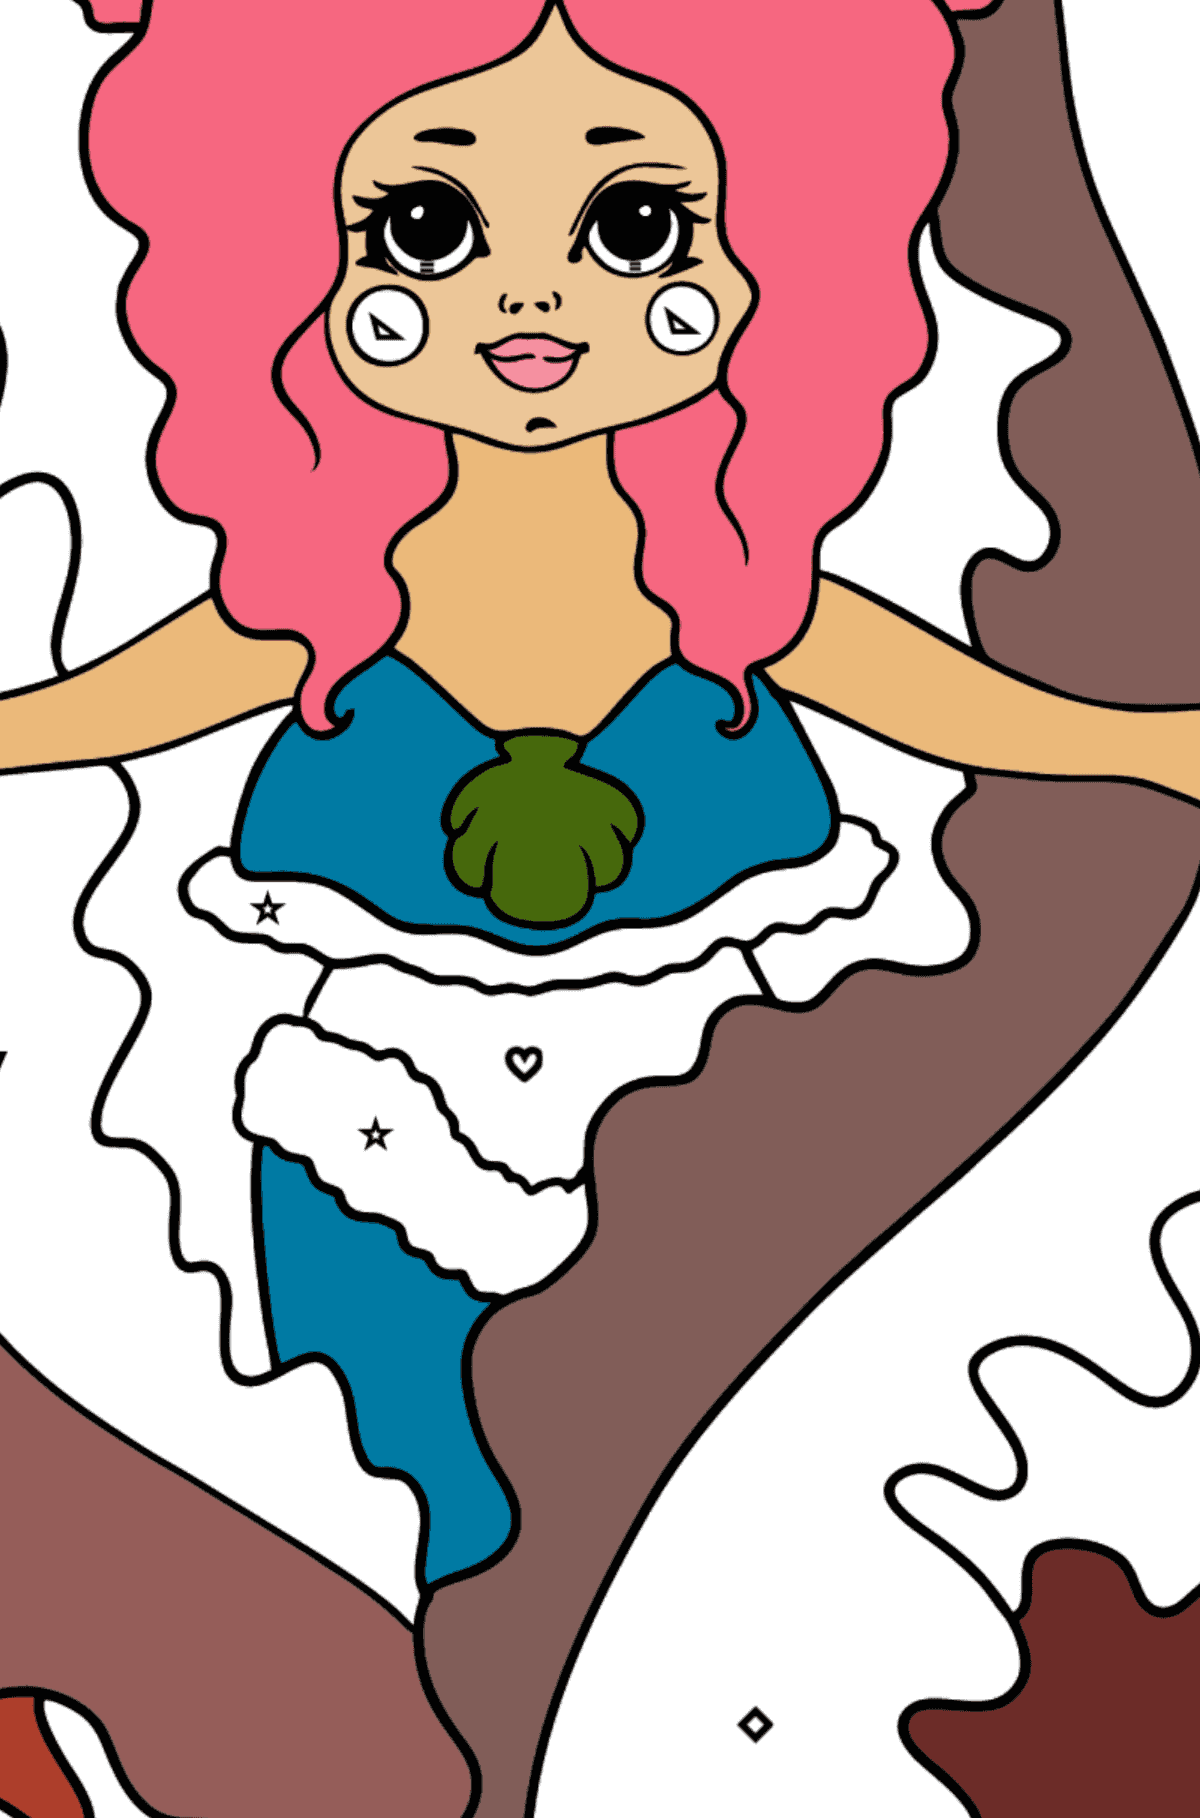 Mermaid and Red Algae coloring page - Coloring by Symbols and Geometric Shapes for Kids